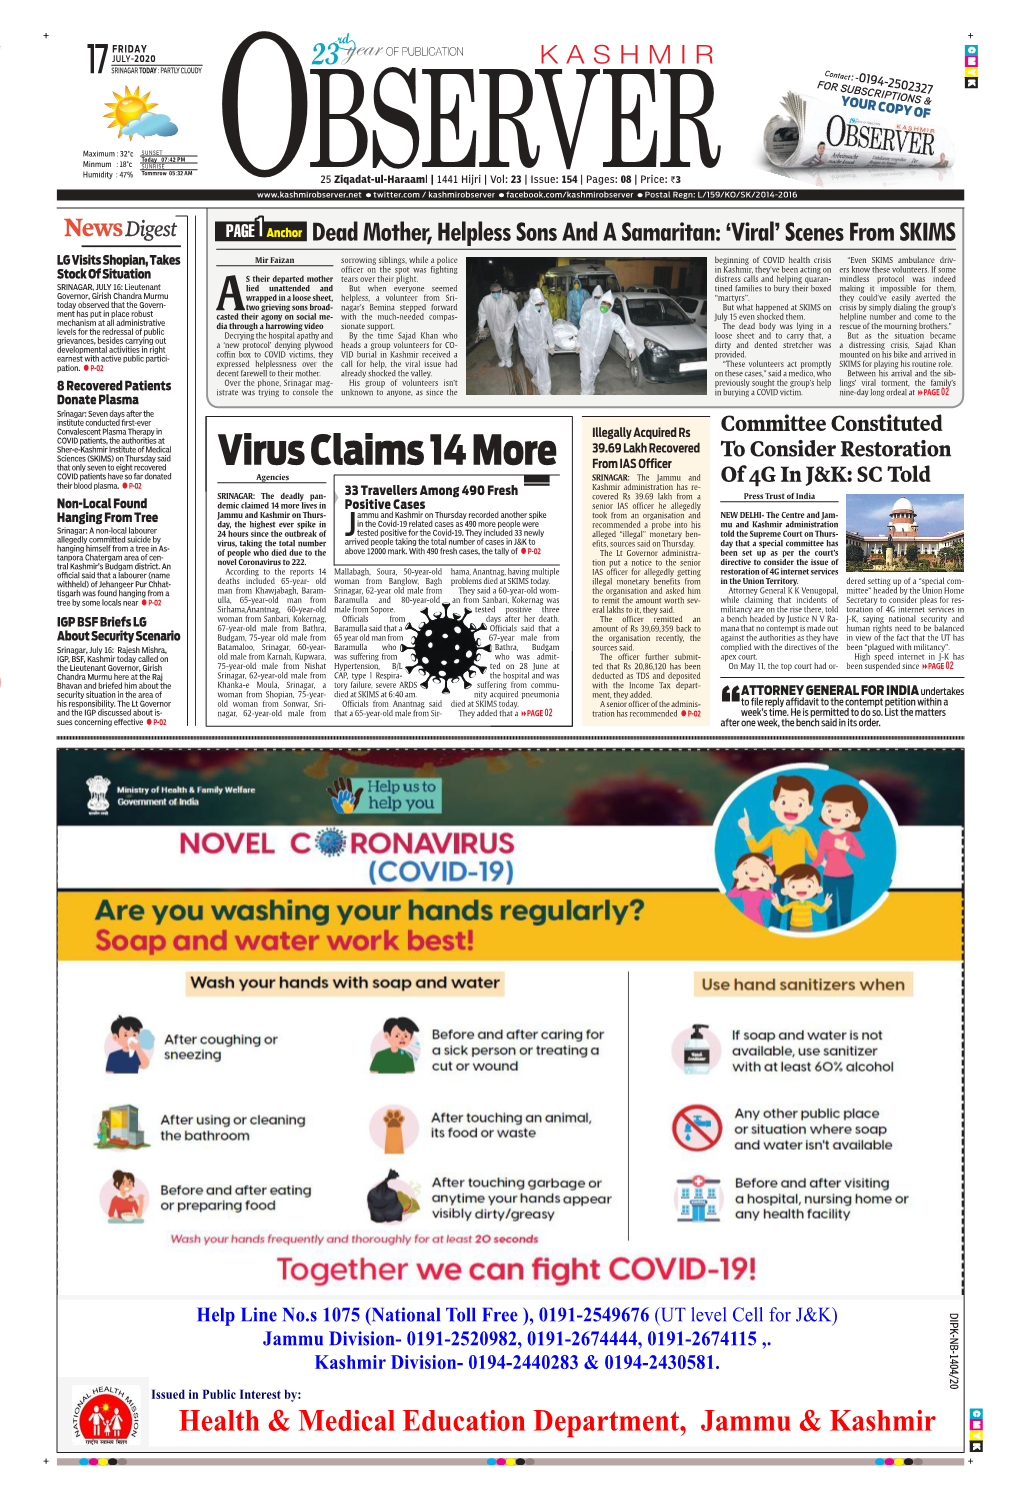 Virus Claims 14 More